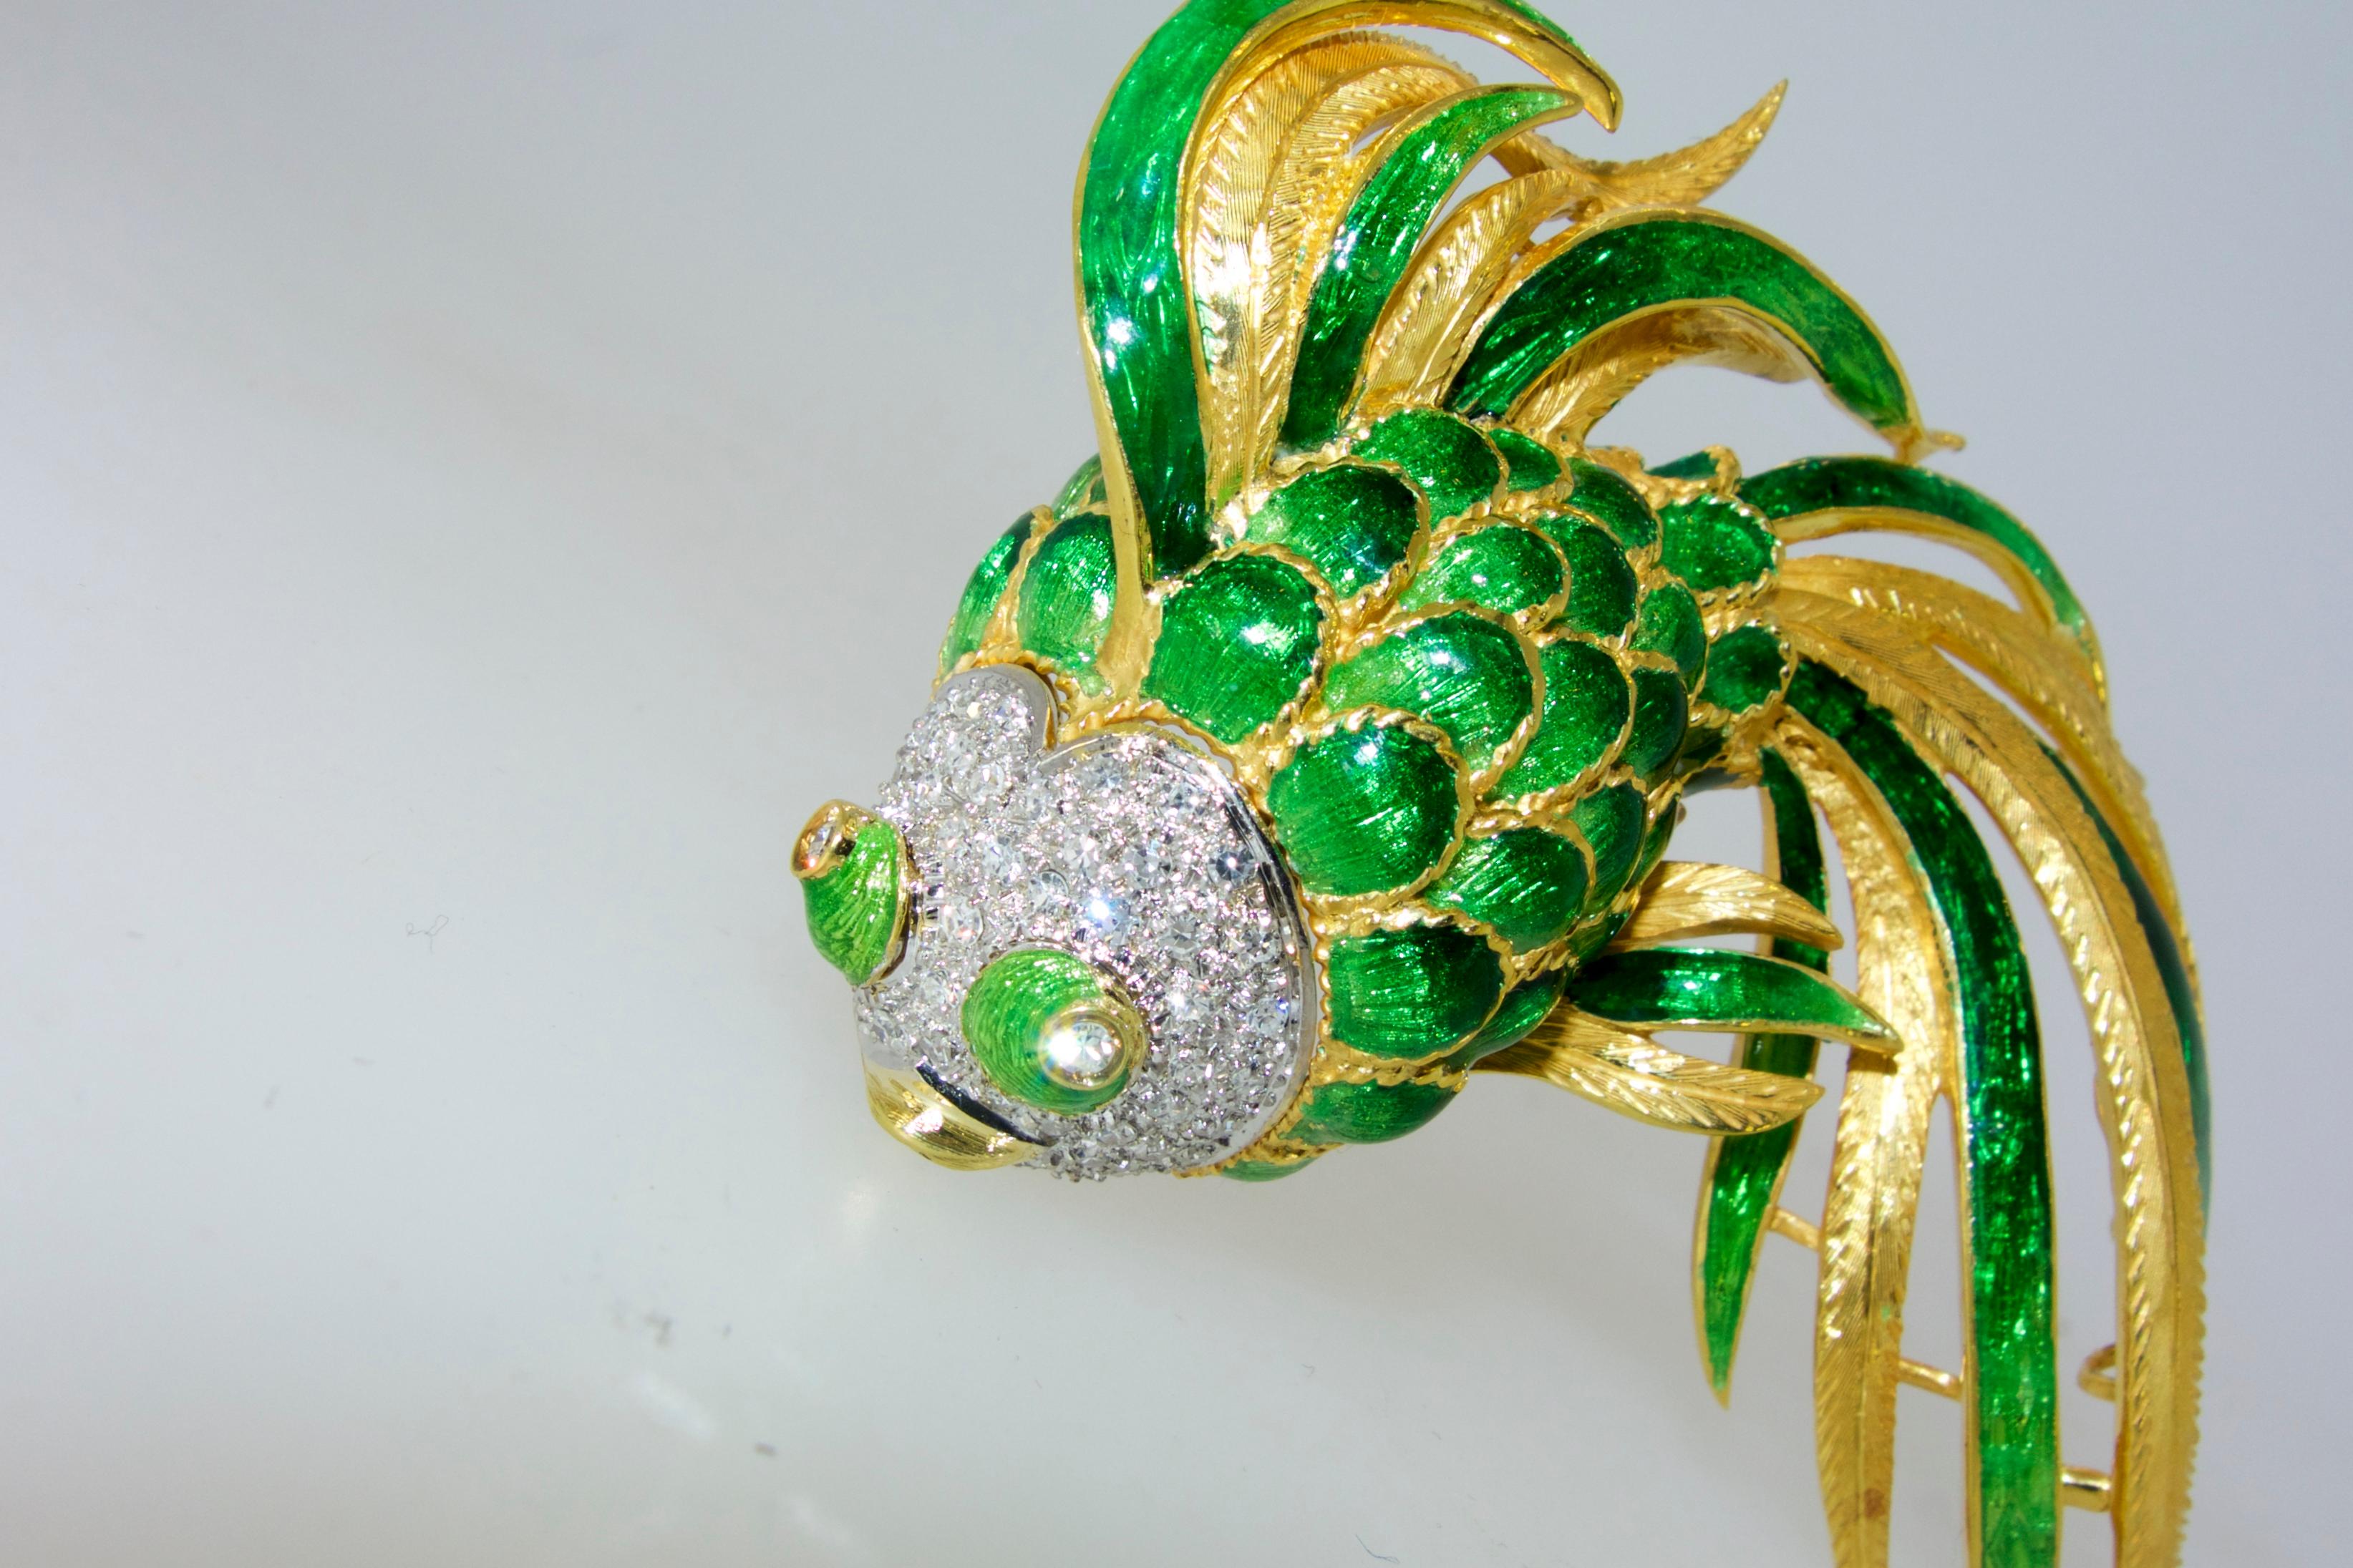 Contemporary Fish Brooch, Large and Colorful with Diamonds, circa 1960